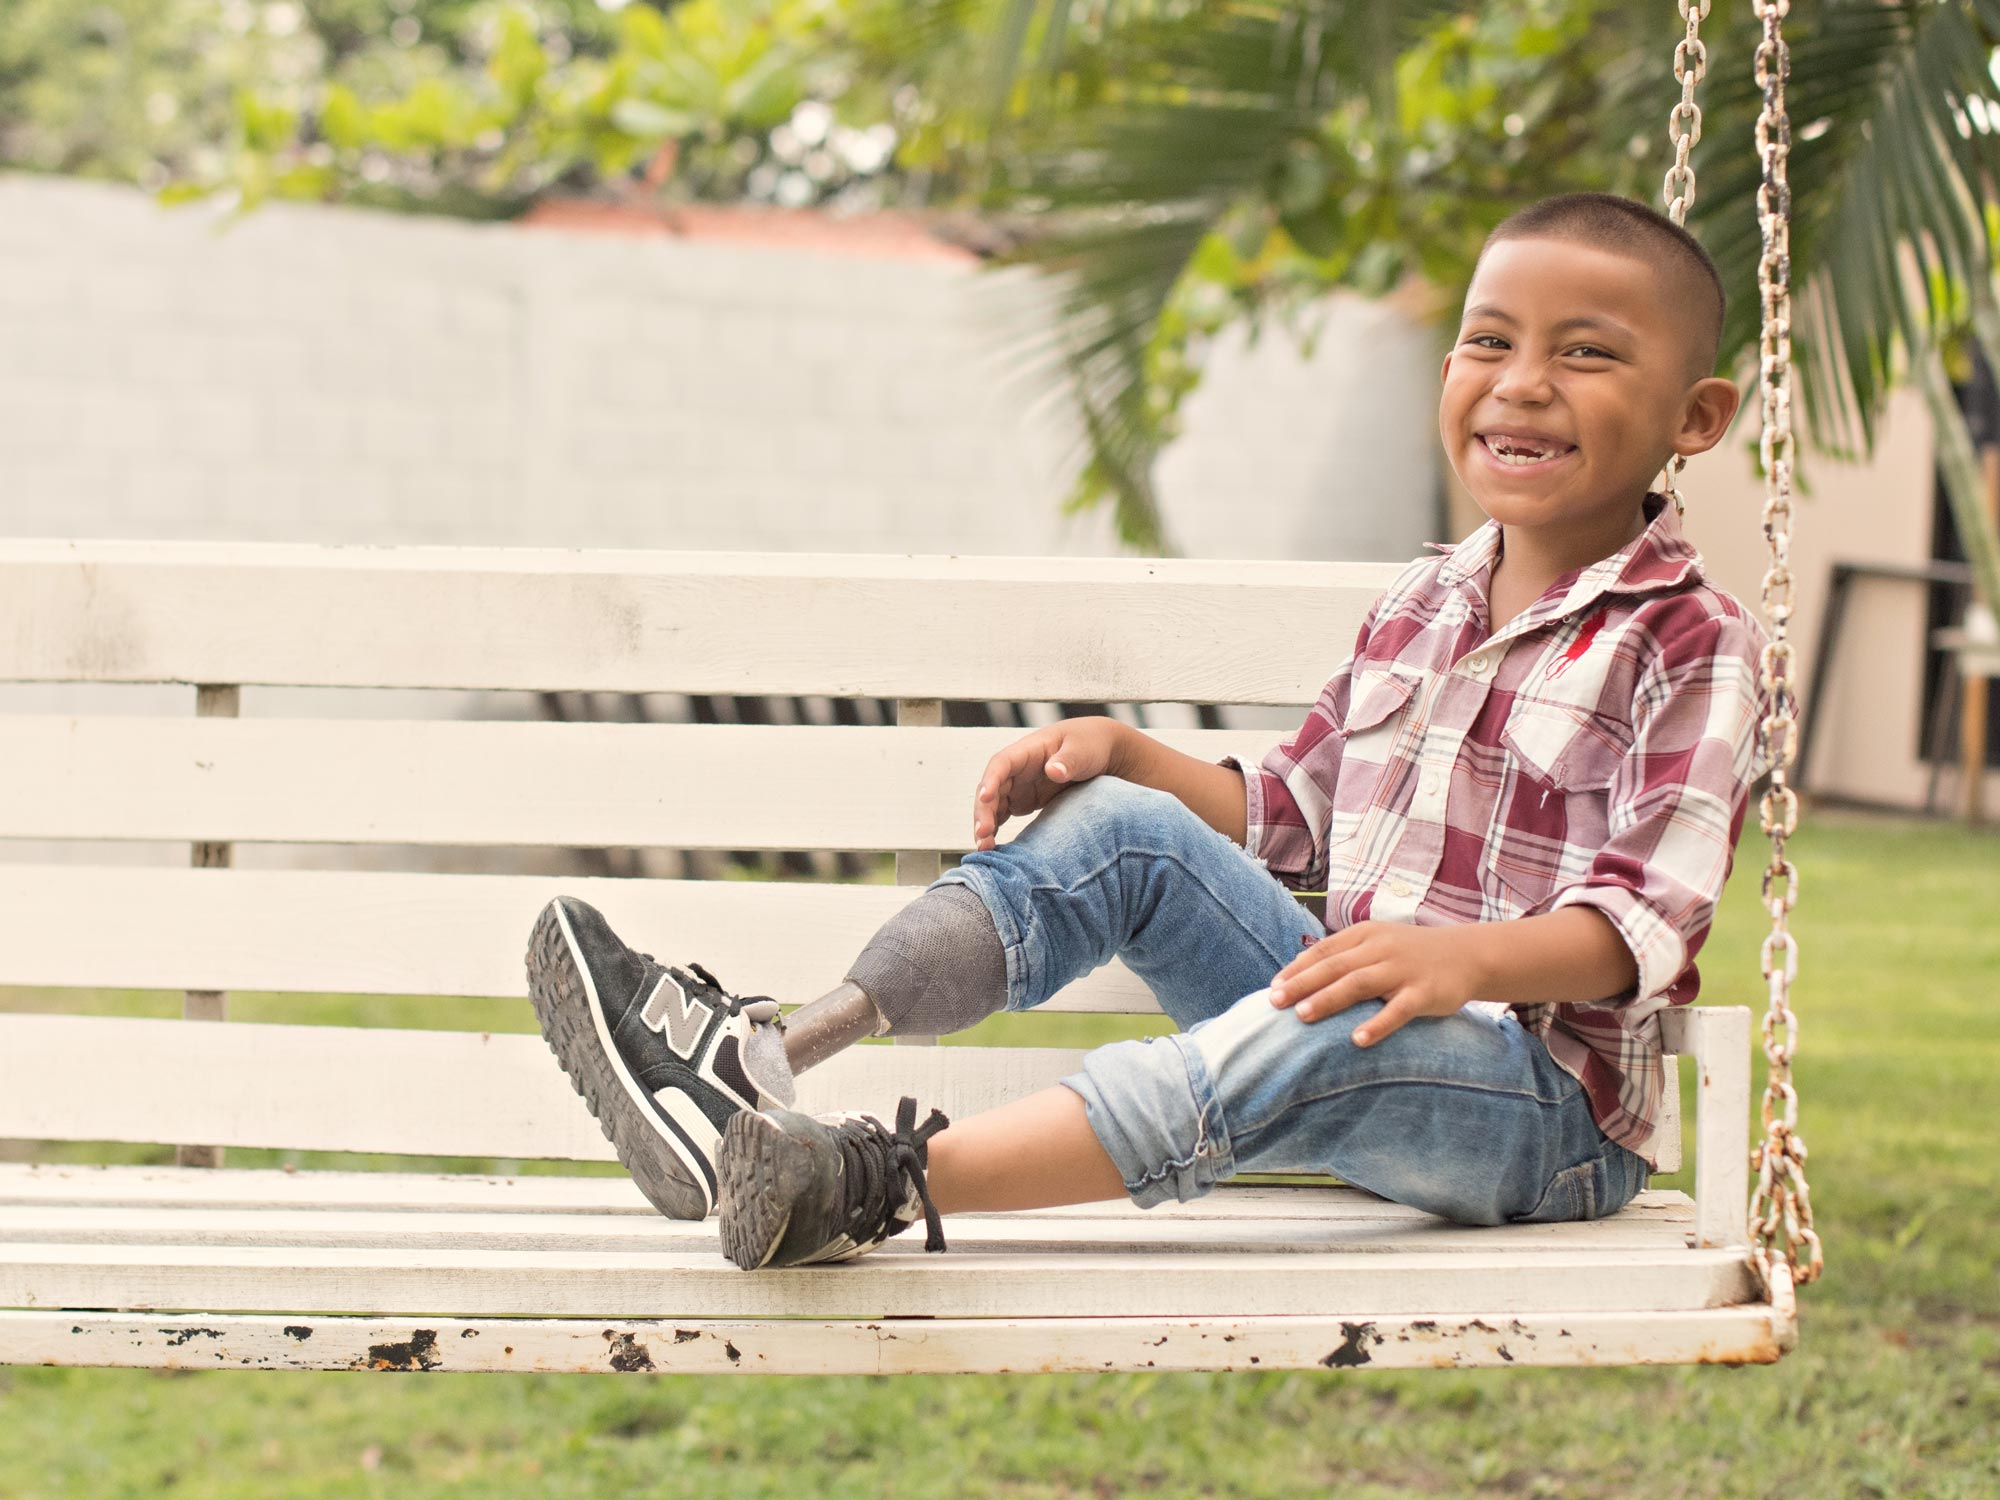 image of a boy on a swing